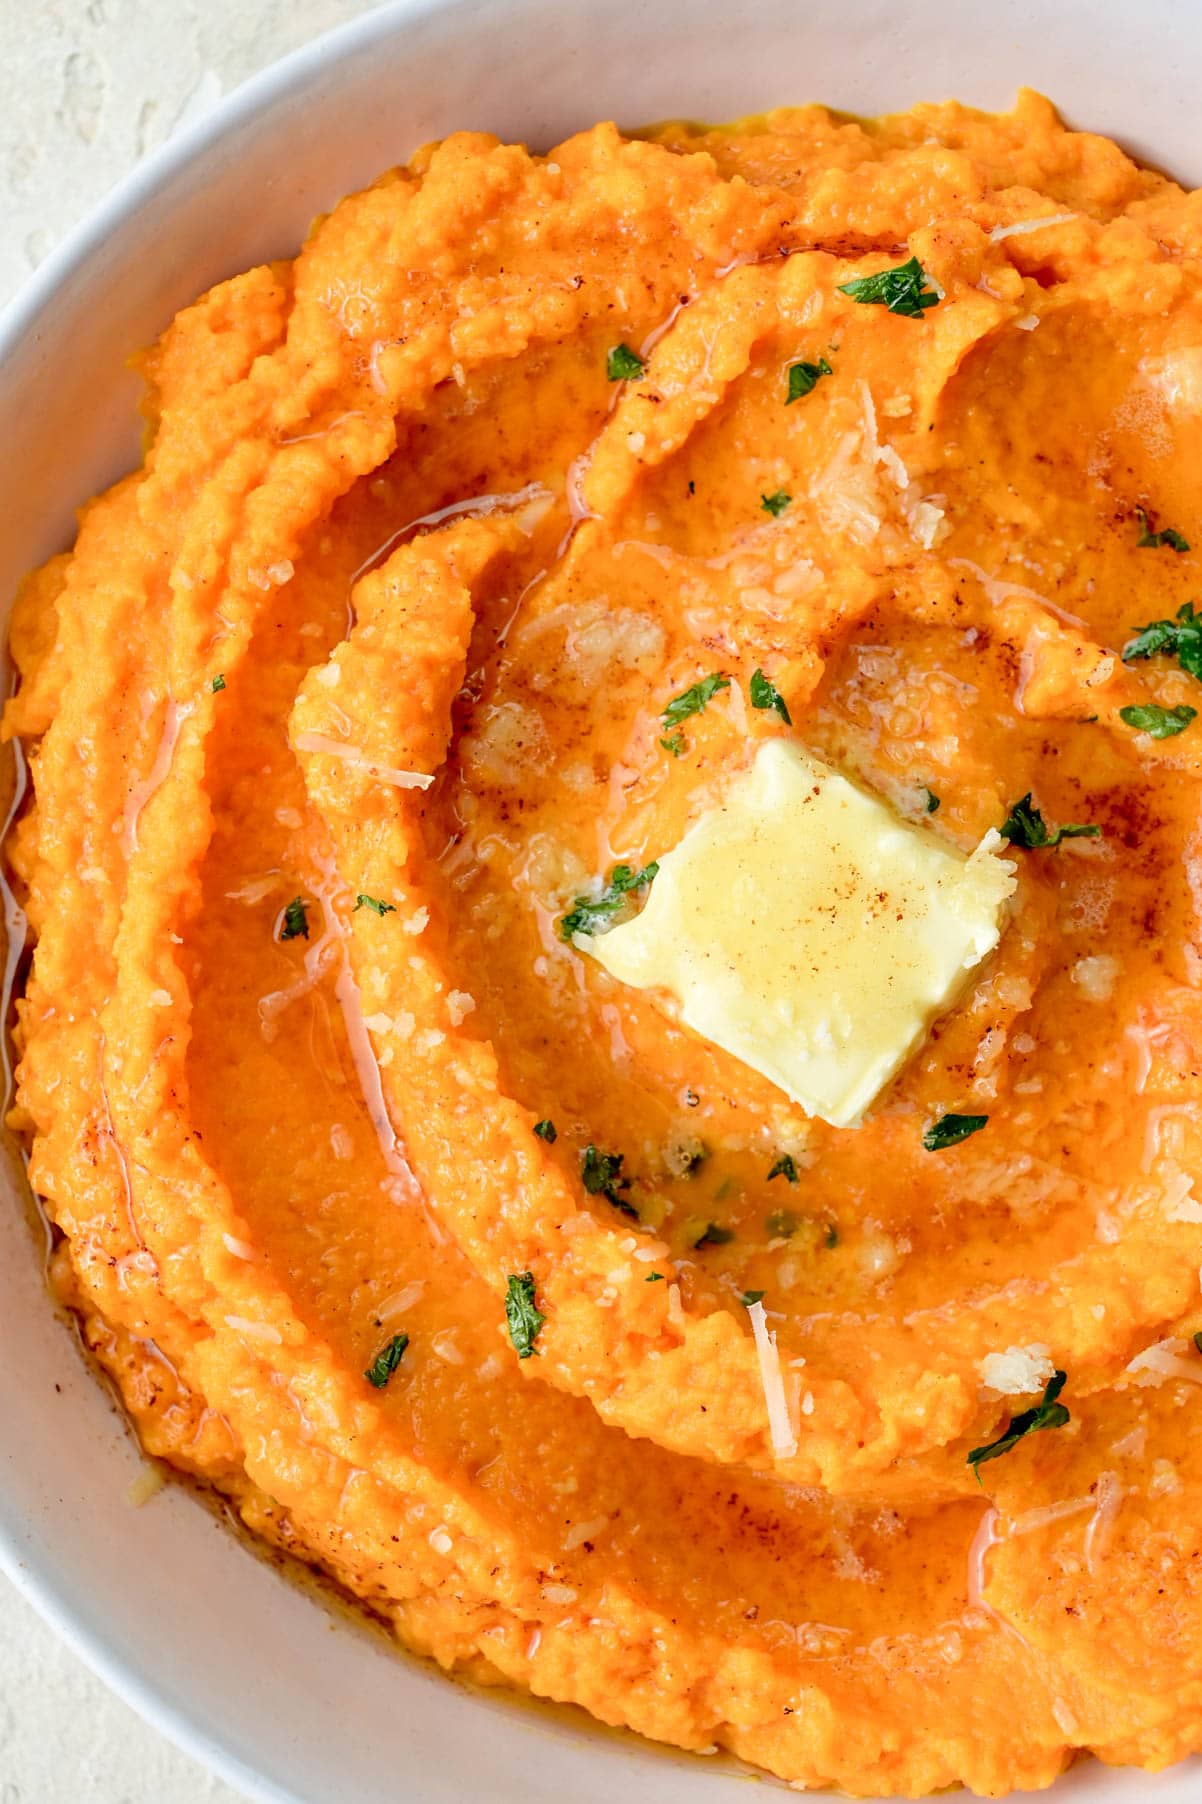 Mashed carrots in a white bowl.